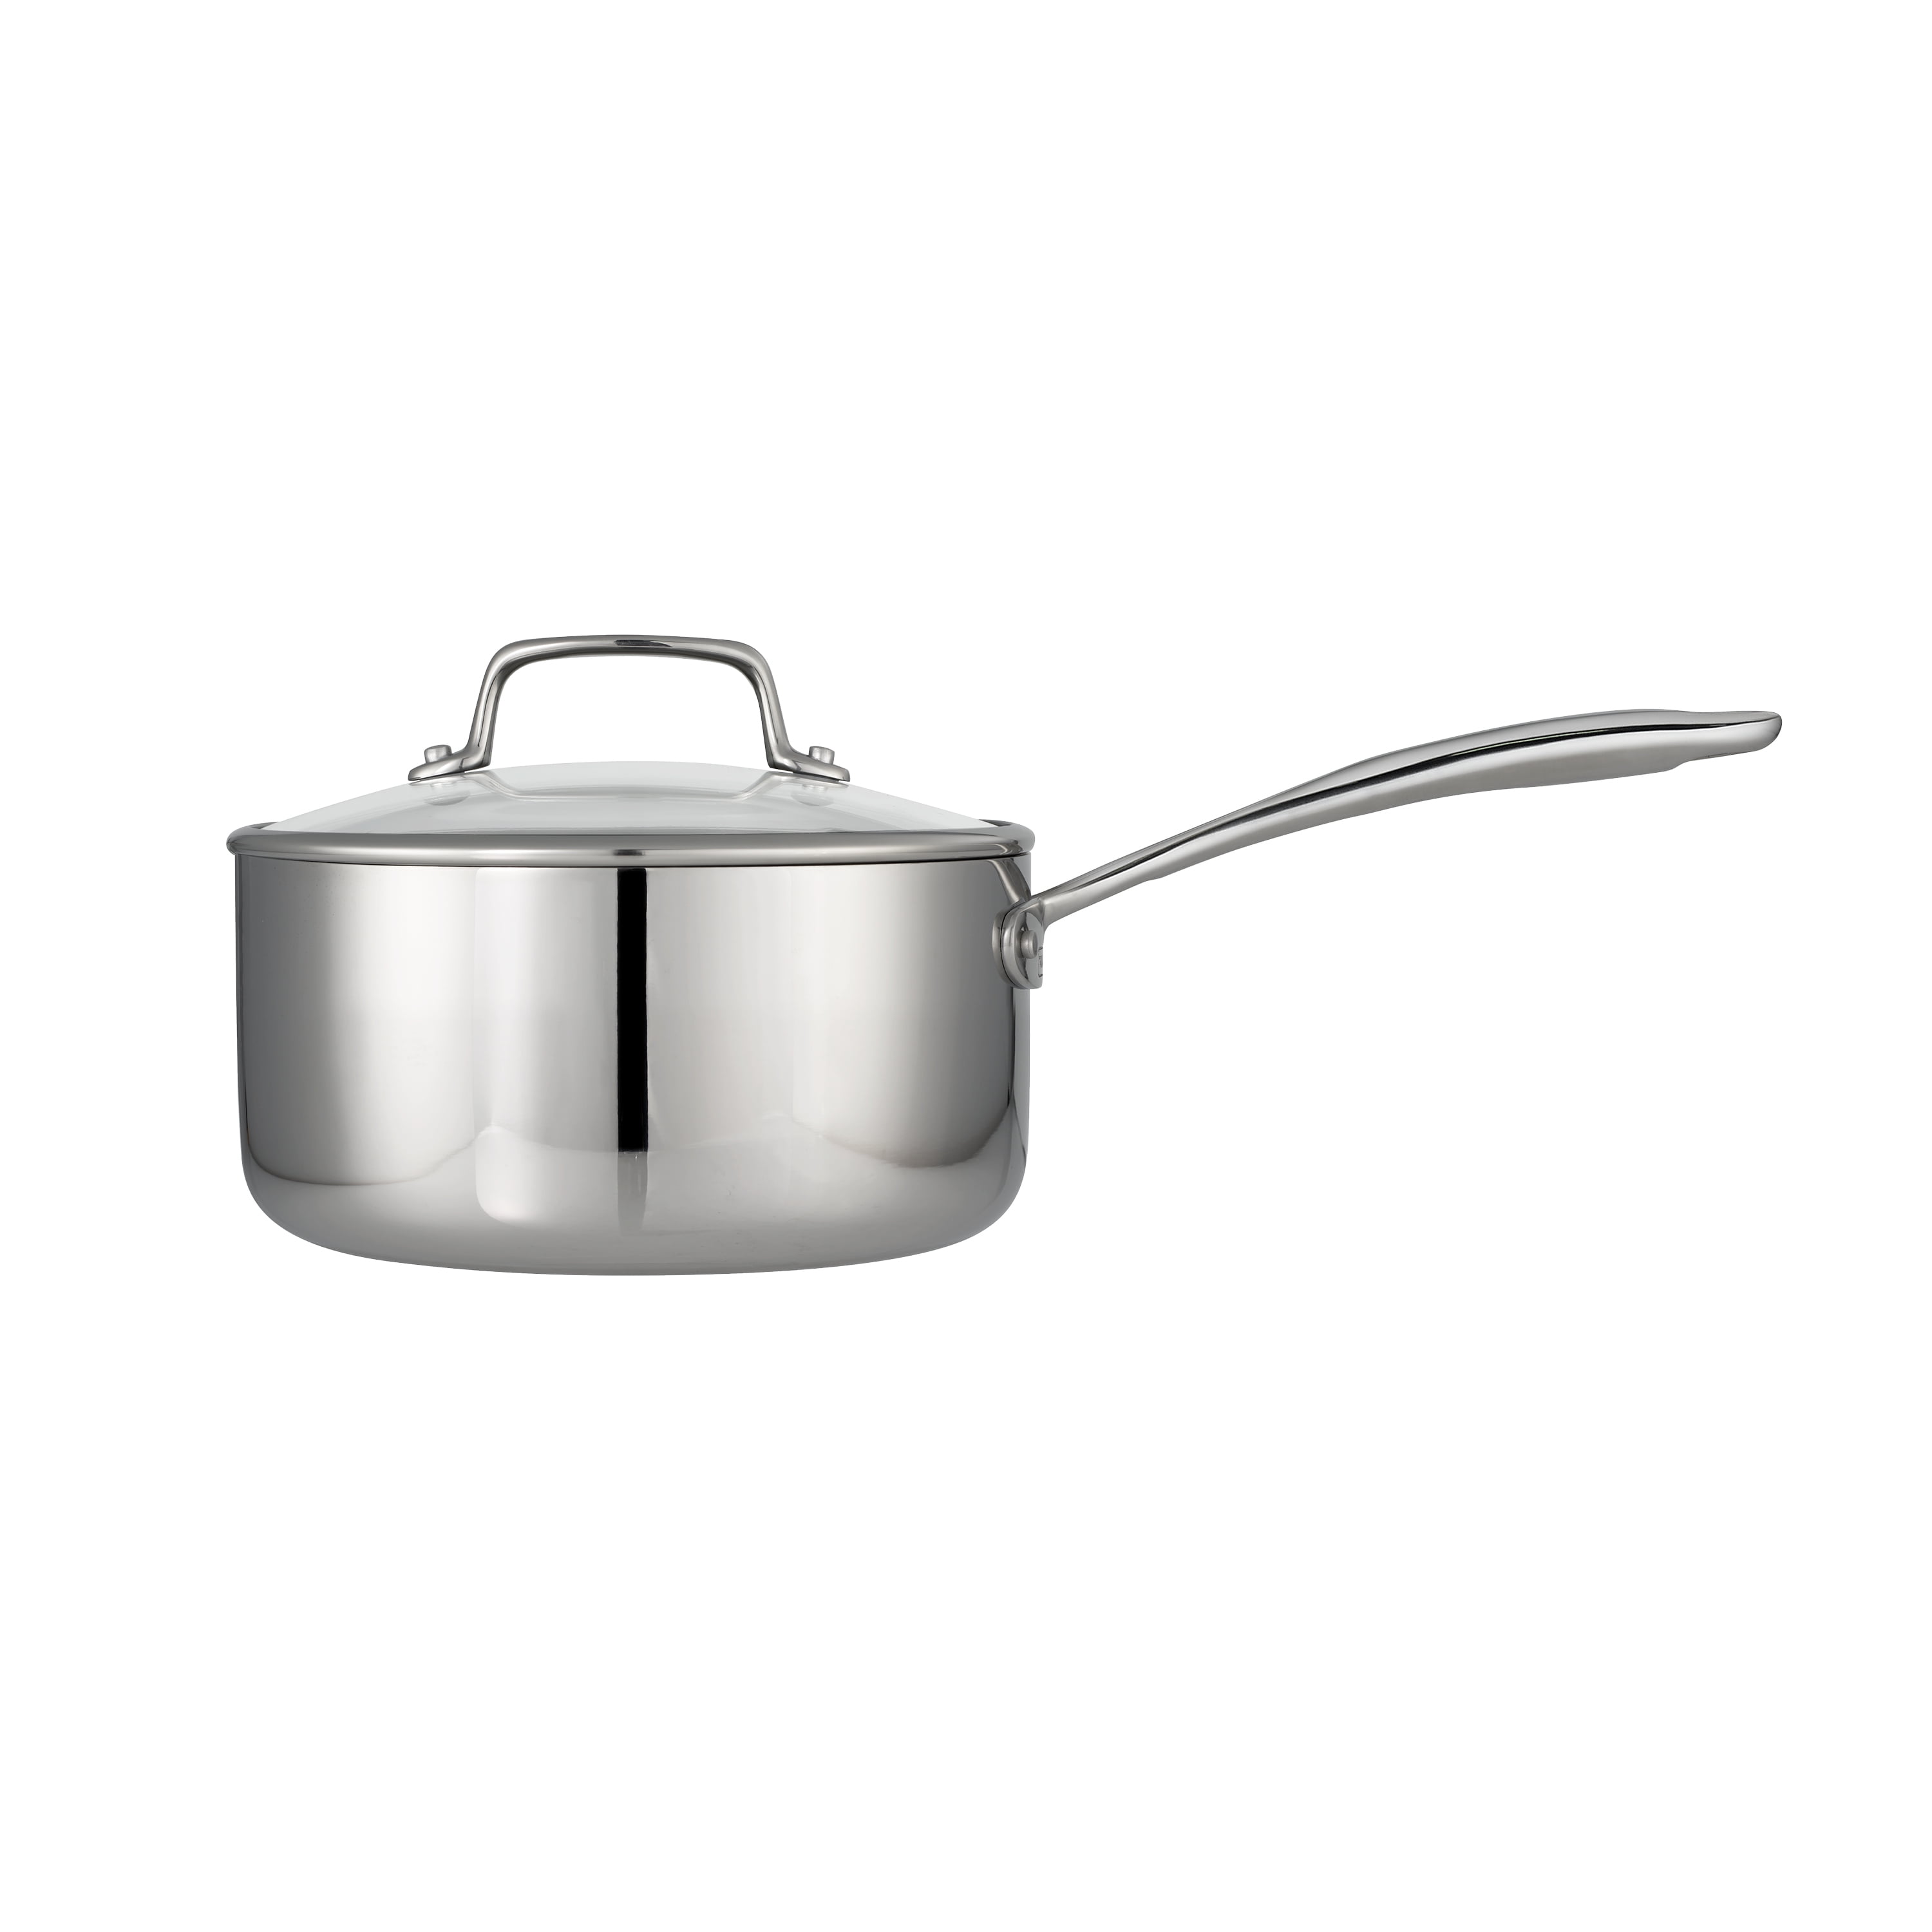 3 Qt Tri-Ply Clad Stainless Steel Covered Deep Sauté Pan - Tramontina US